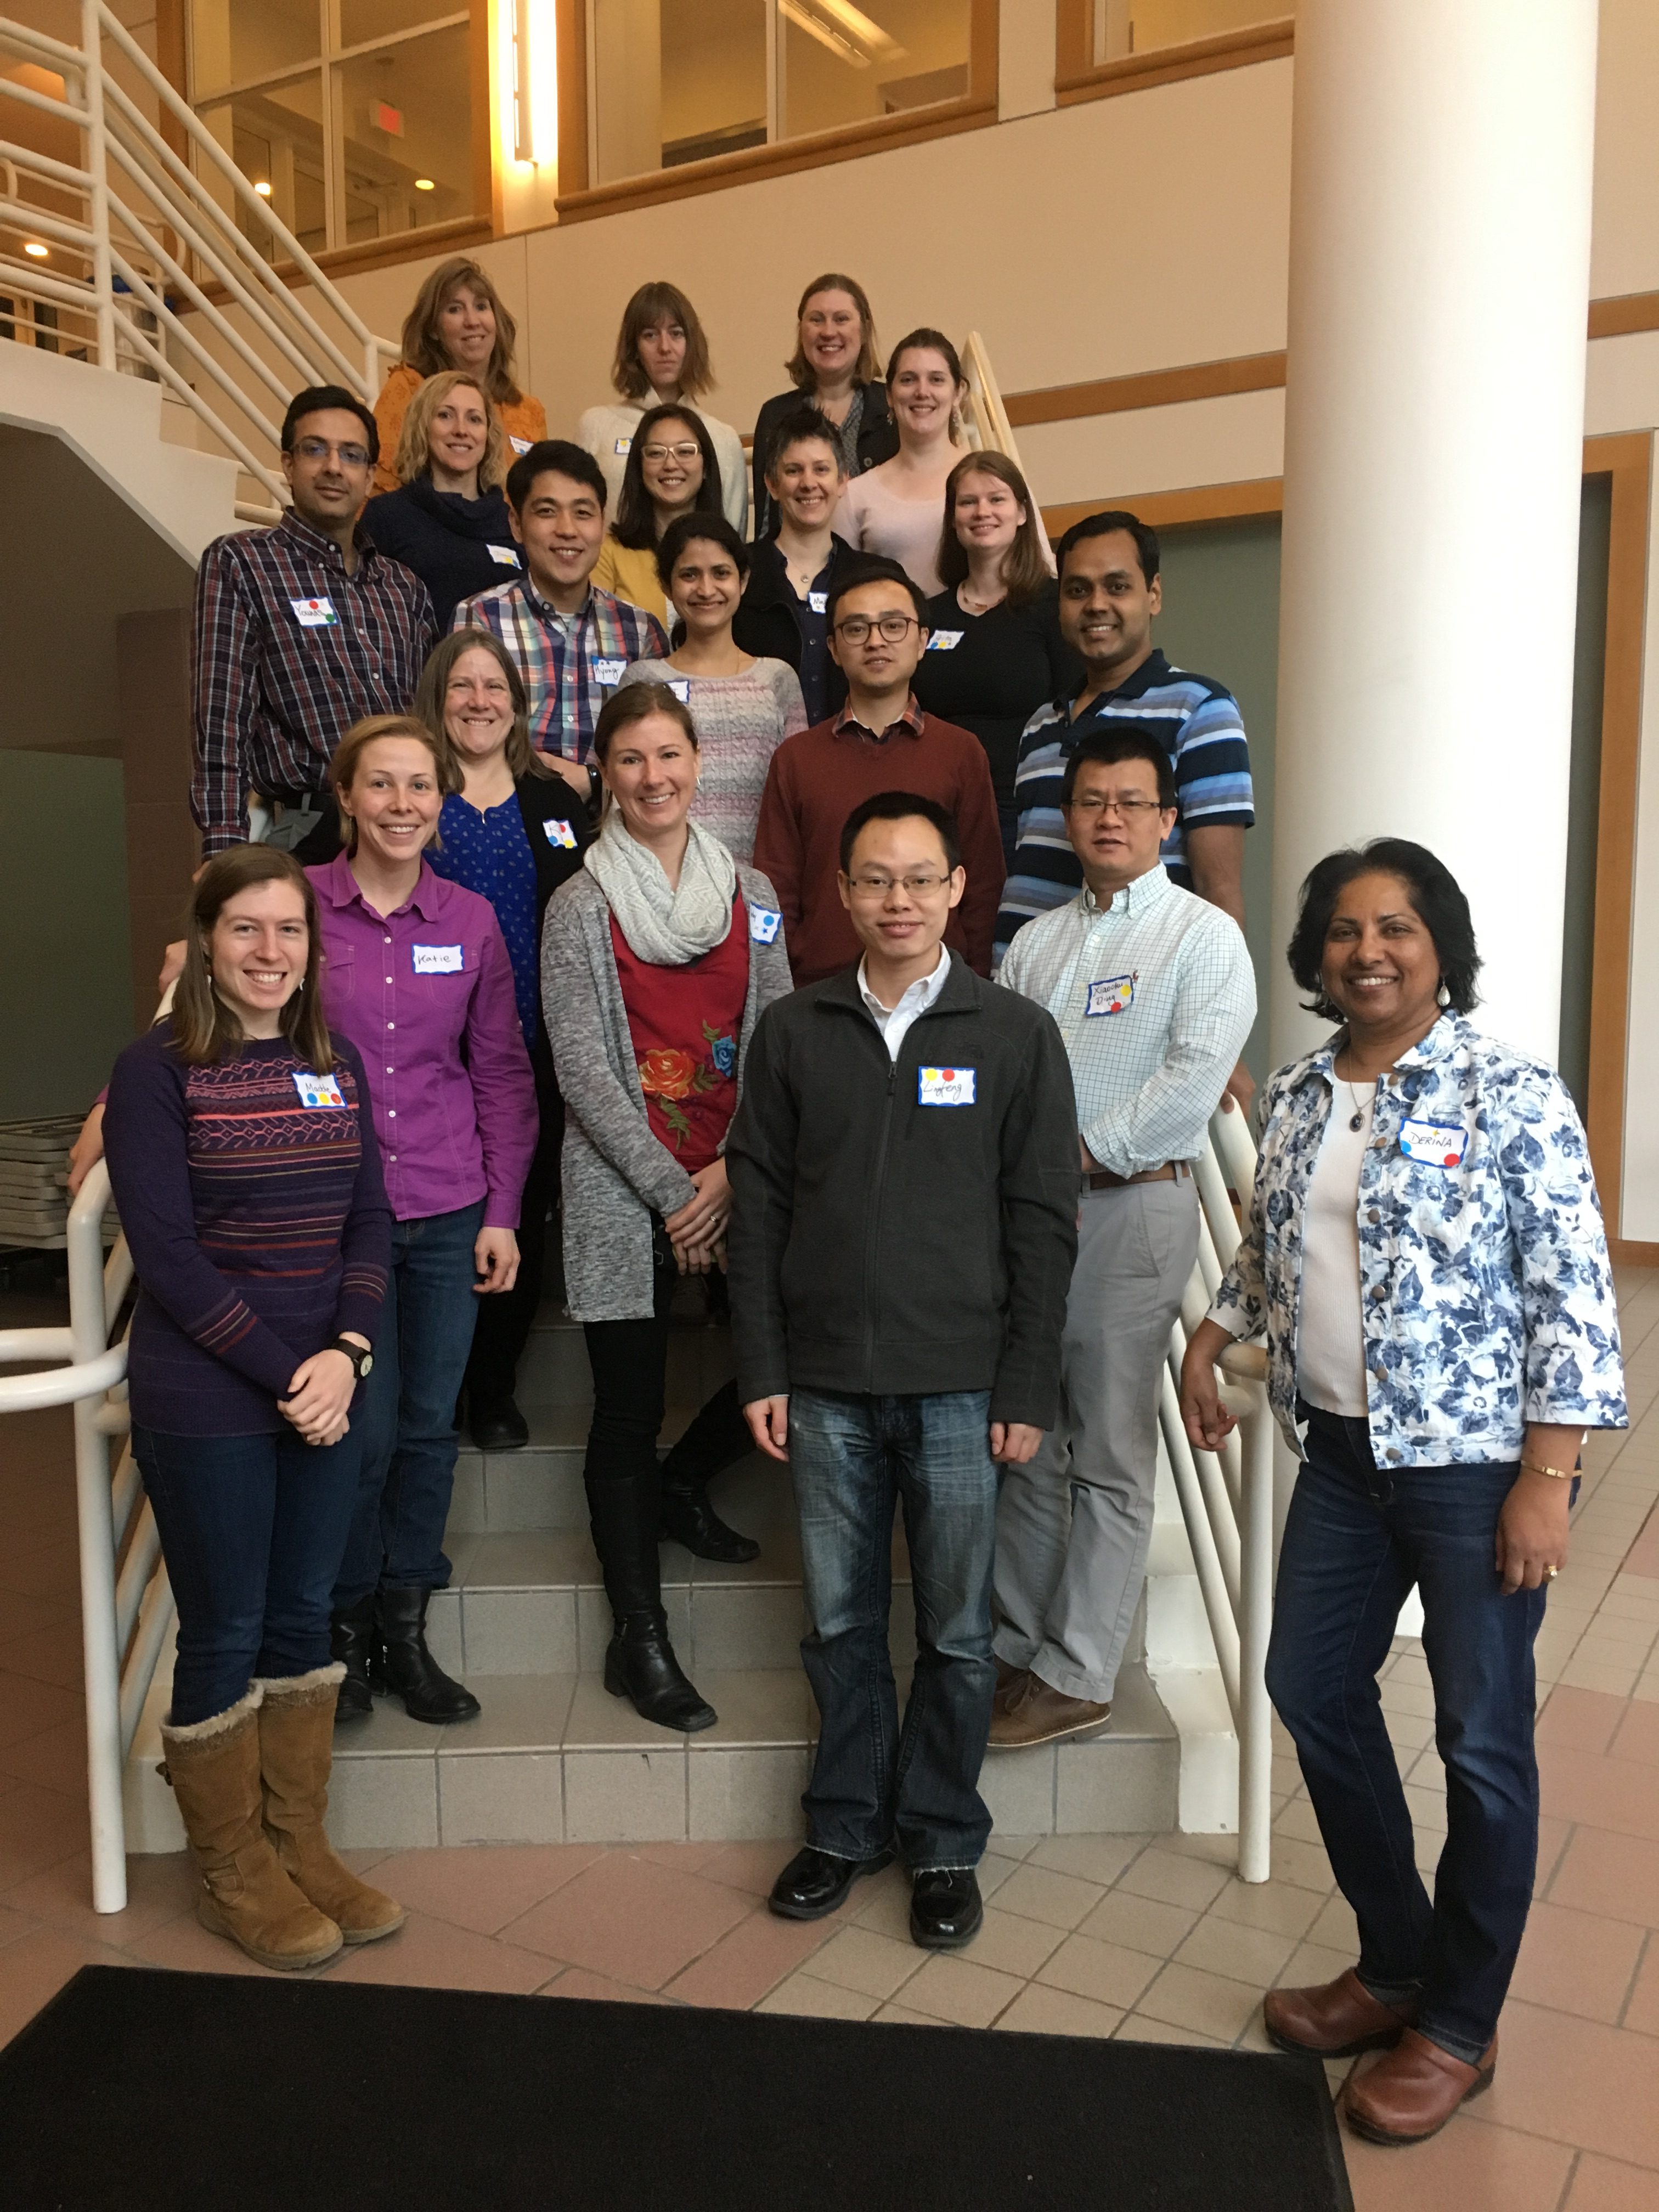 Participants in the 2018 Inclusive Teaching Institute on a staircase